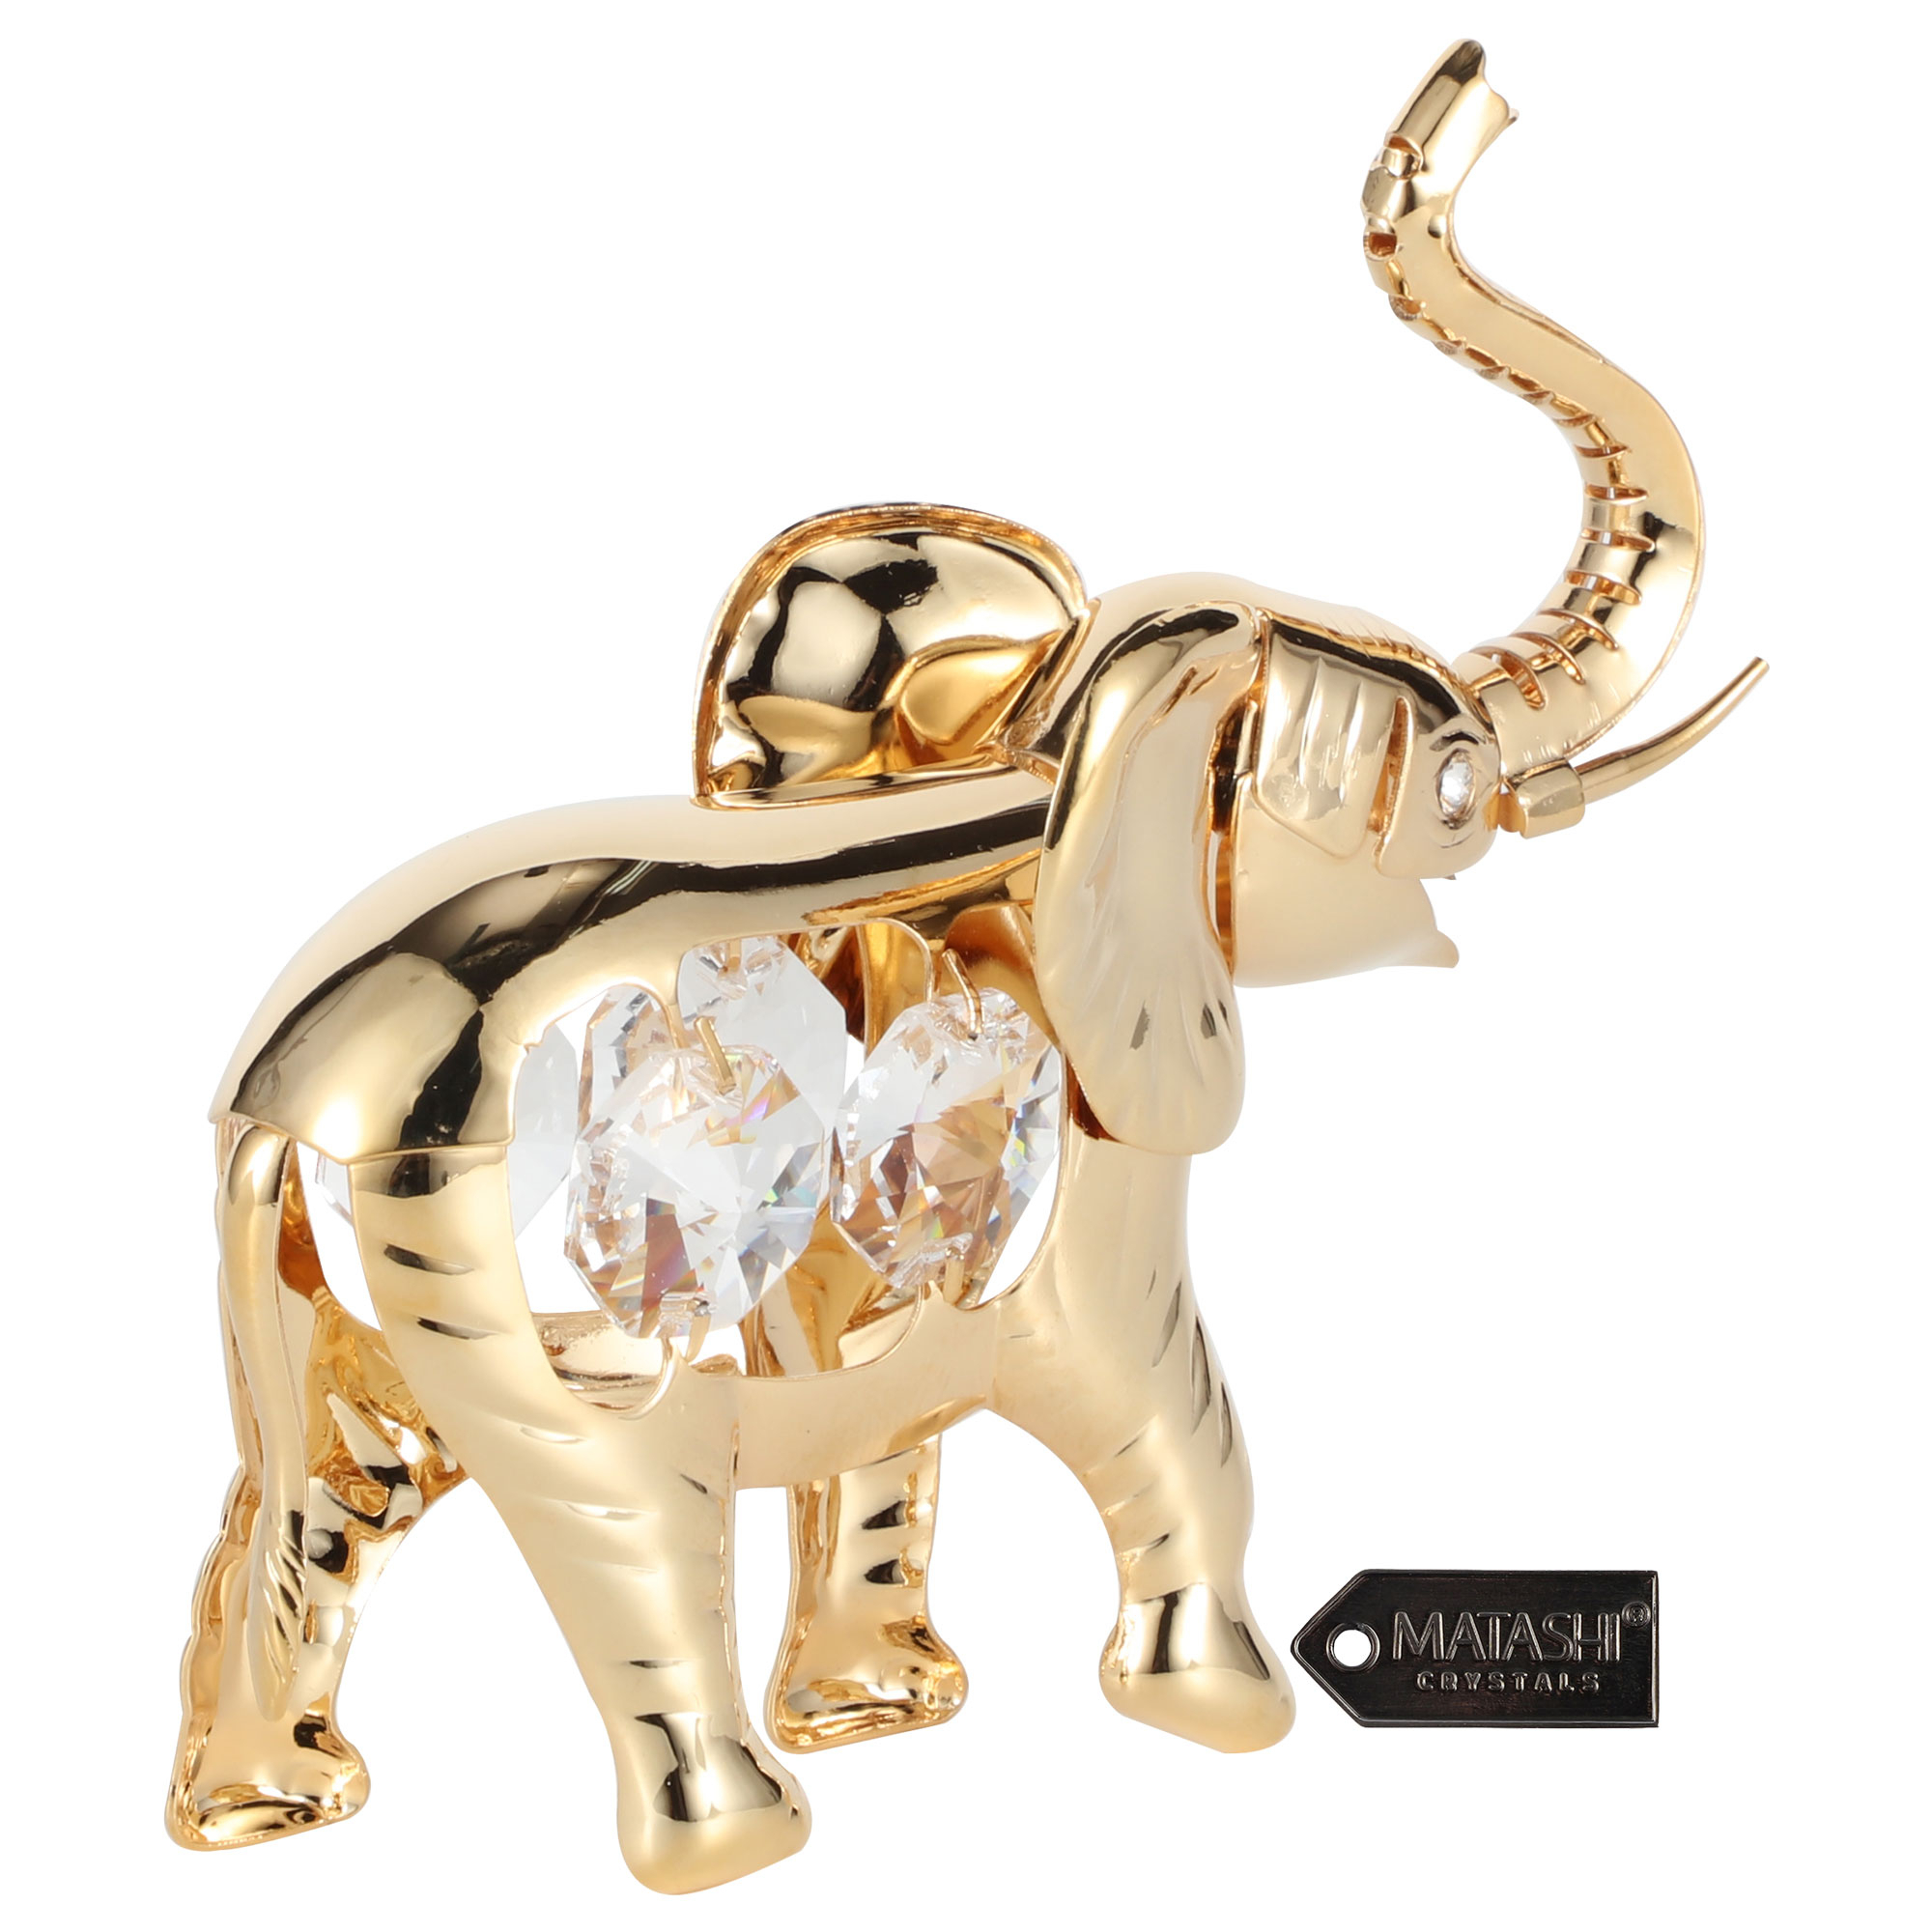 Matashi 24K Gold Plated Crystal Studded Elephant Ornament Tabletop Home Decorative Showpiece Gift For Christmas Mother's Day Valentine's Day